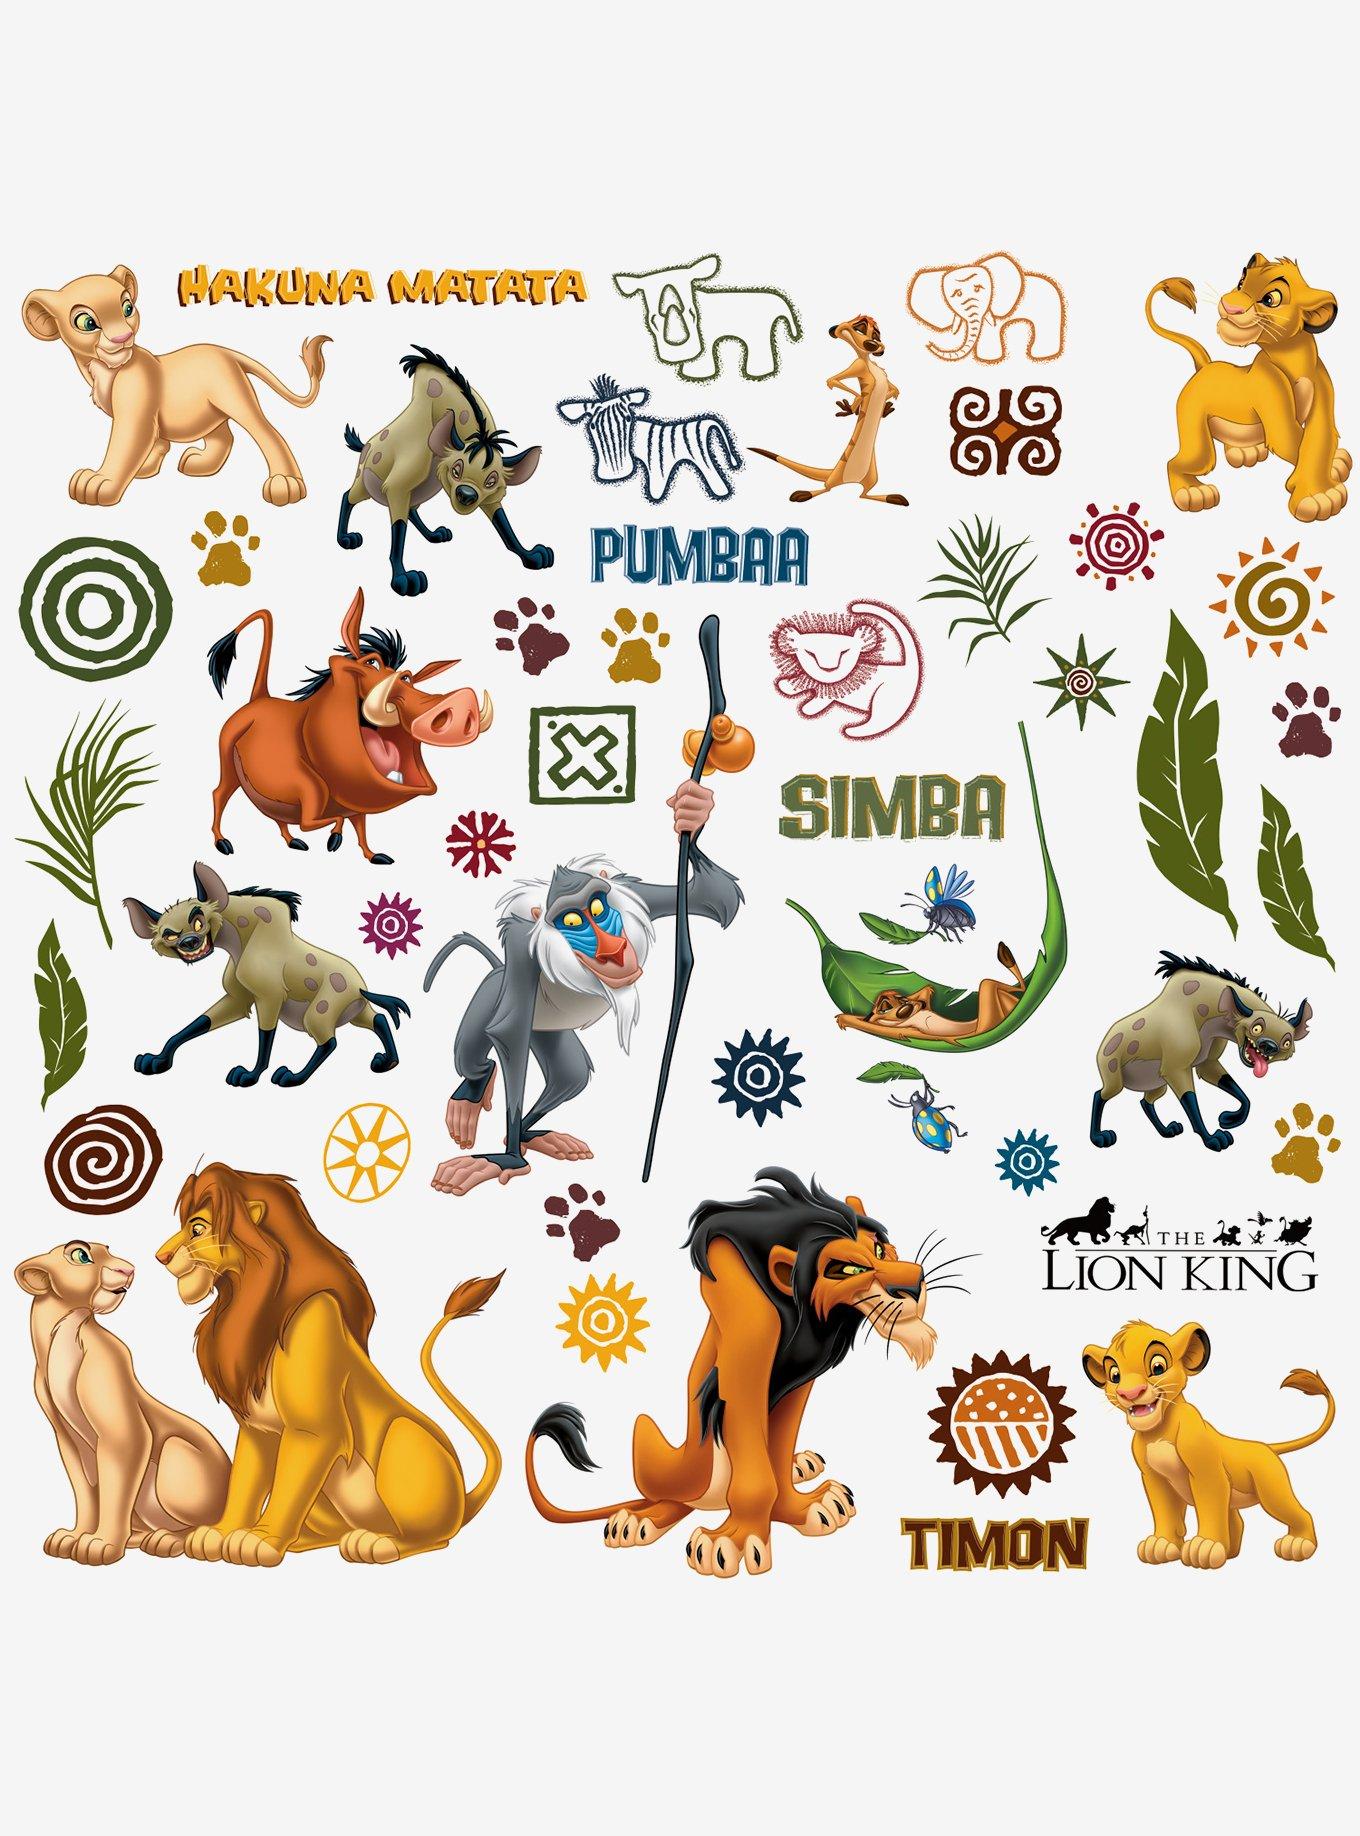 Disney The Lion King Peel & Stick Wall Decals